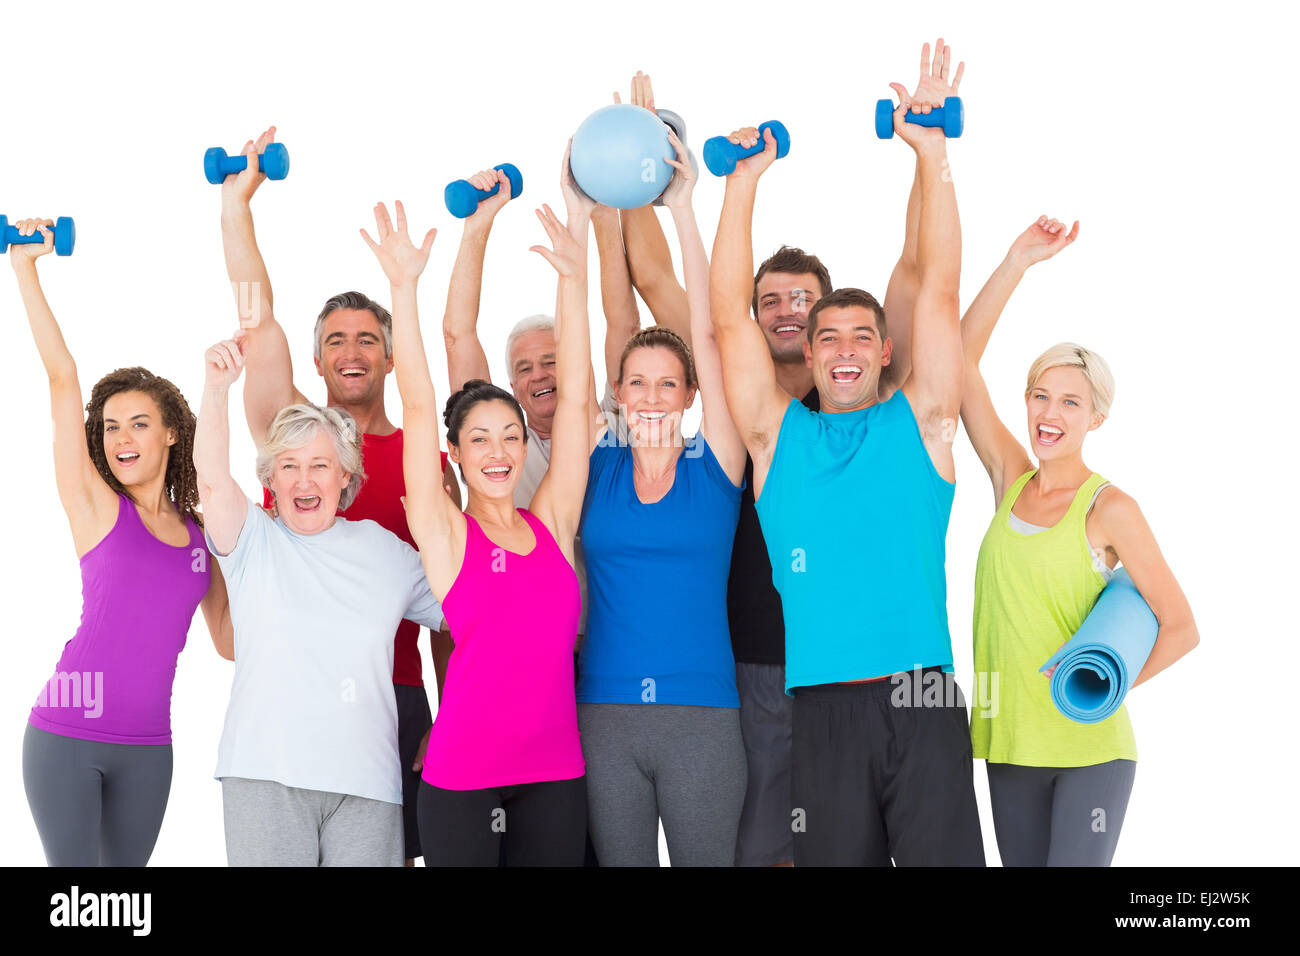 Excited people with exercise equipment raising hands Stock Photo